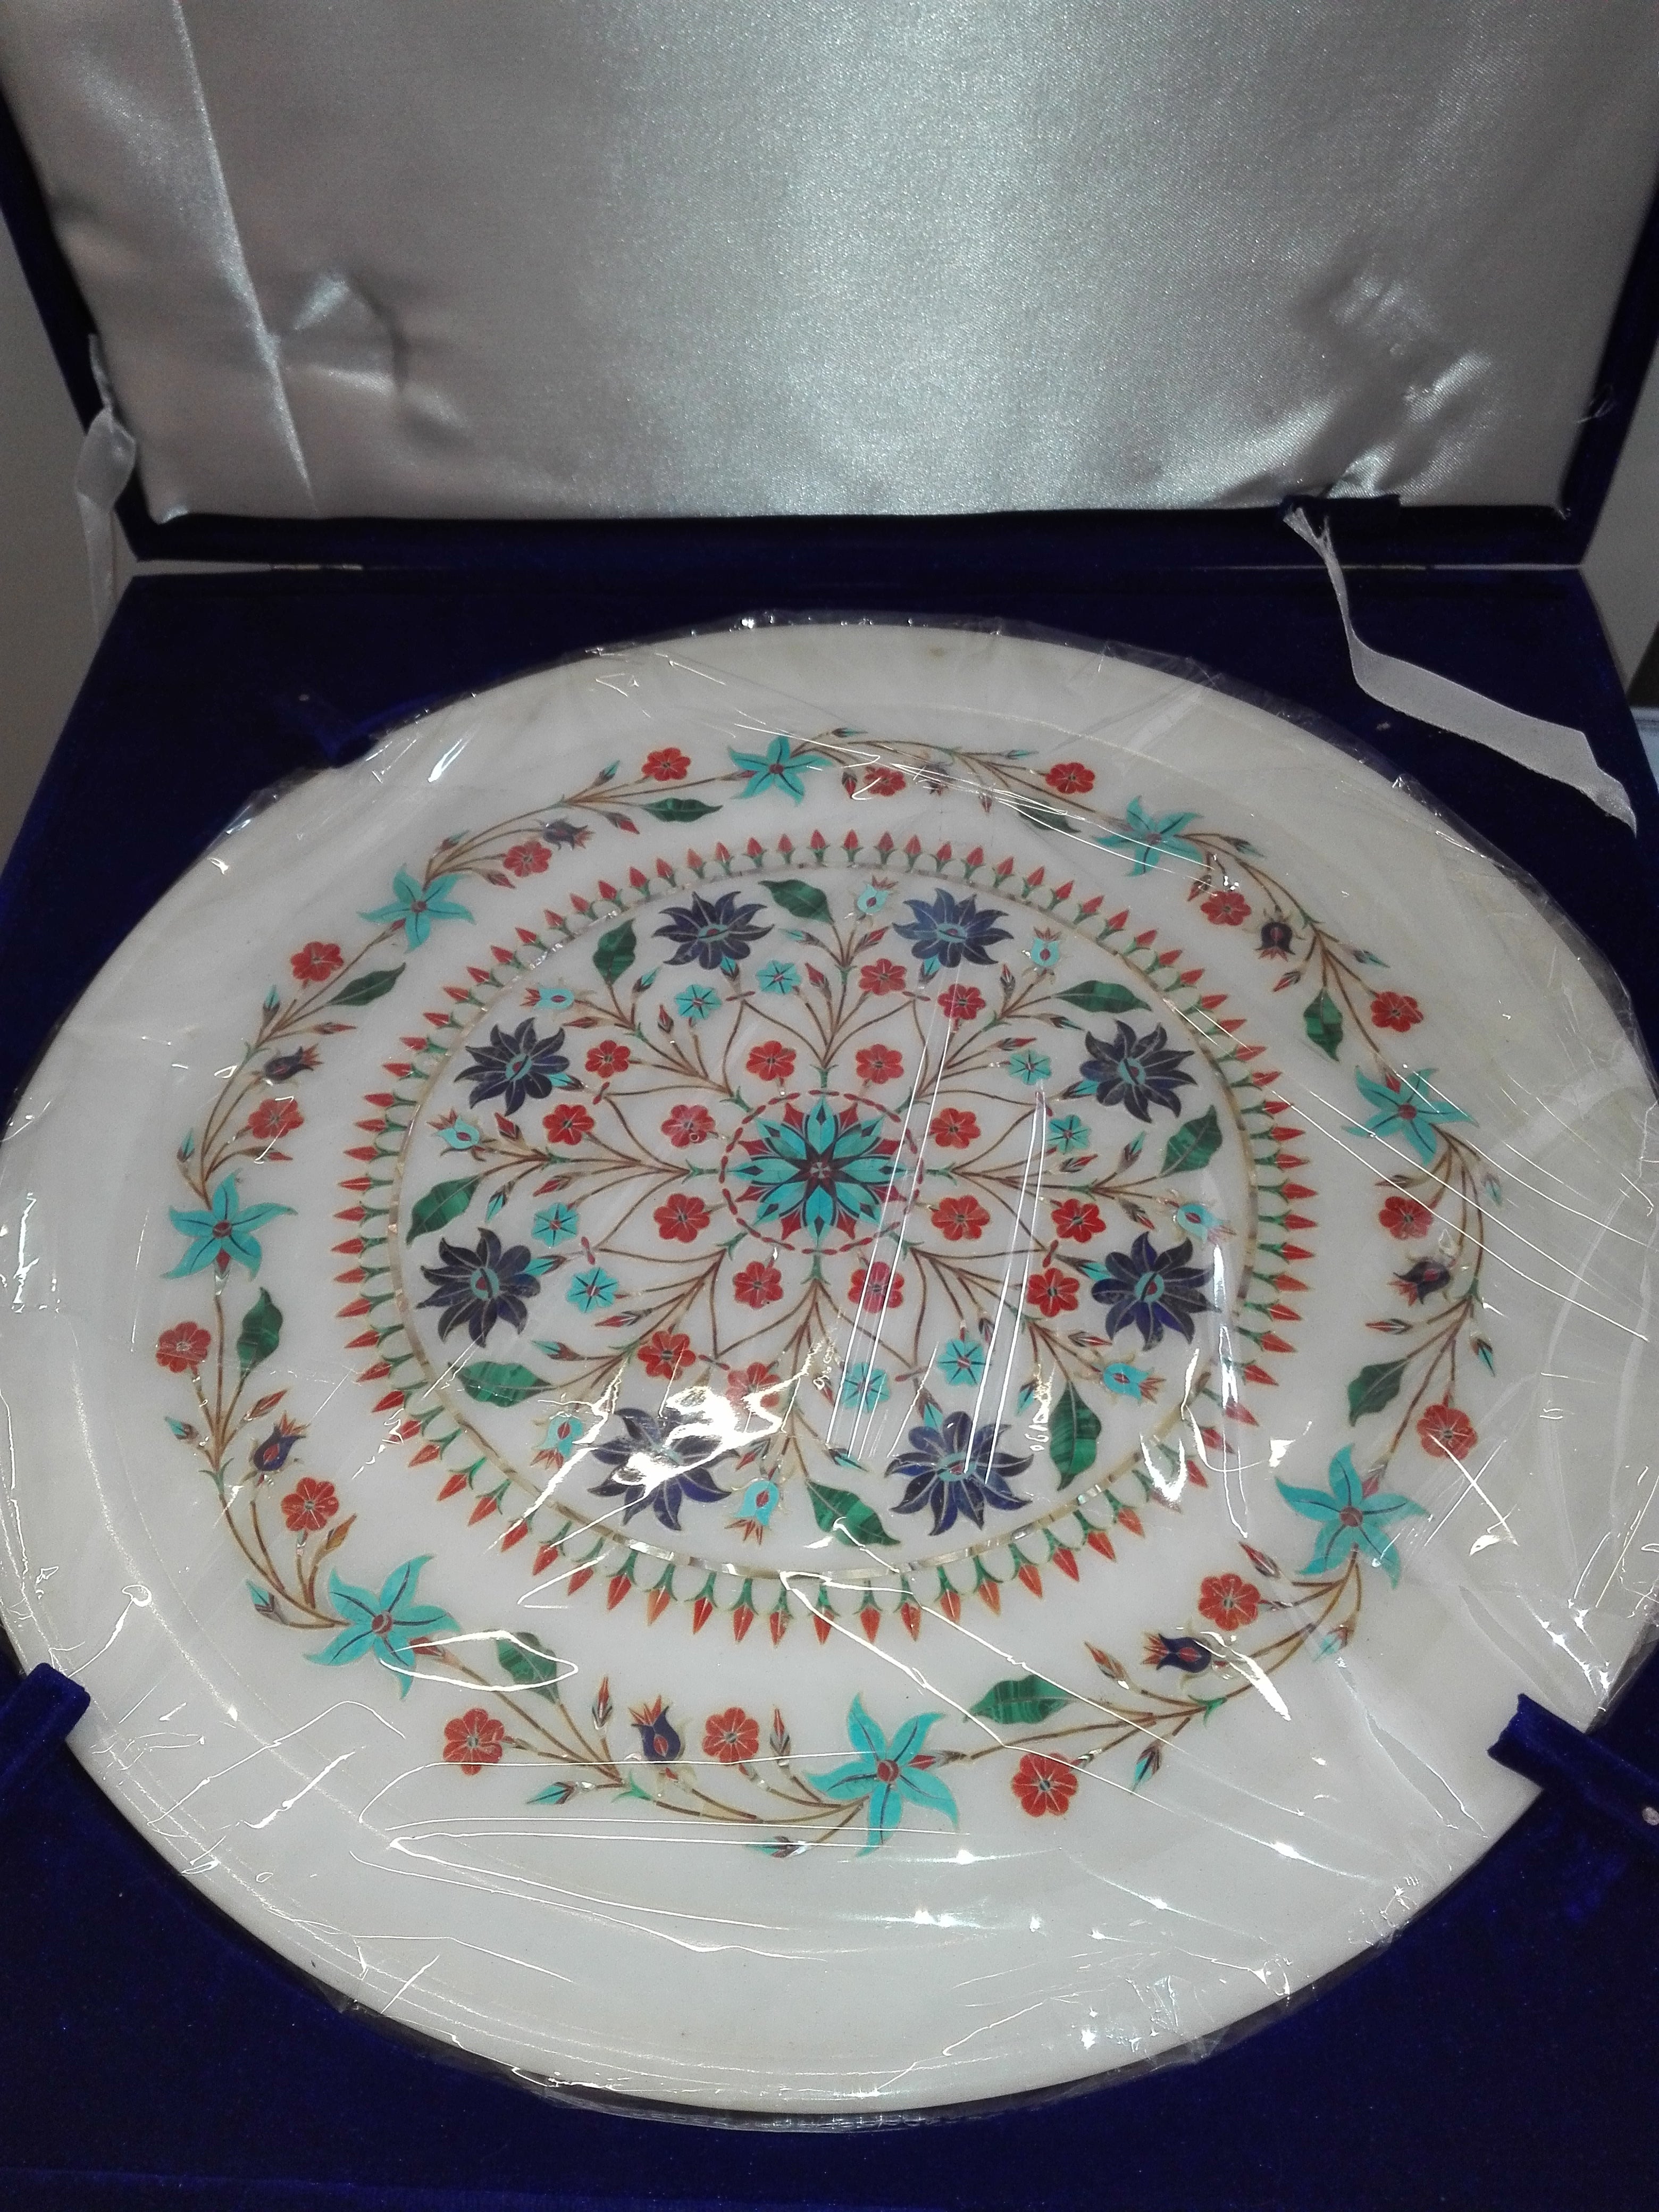 13" Marble Plate lapis Pietra Dura Handmade inlay Home Decorative & Gifts